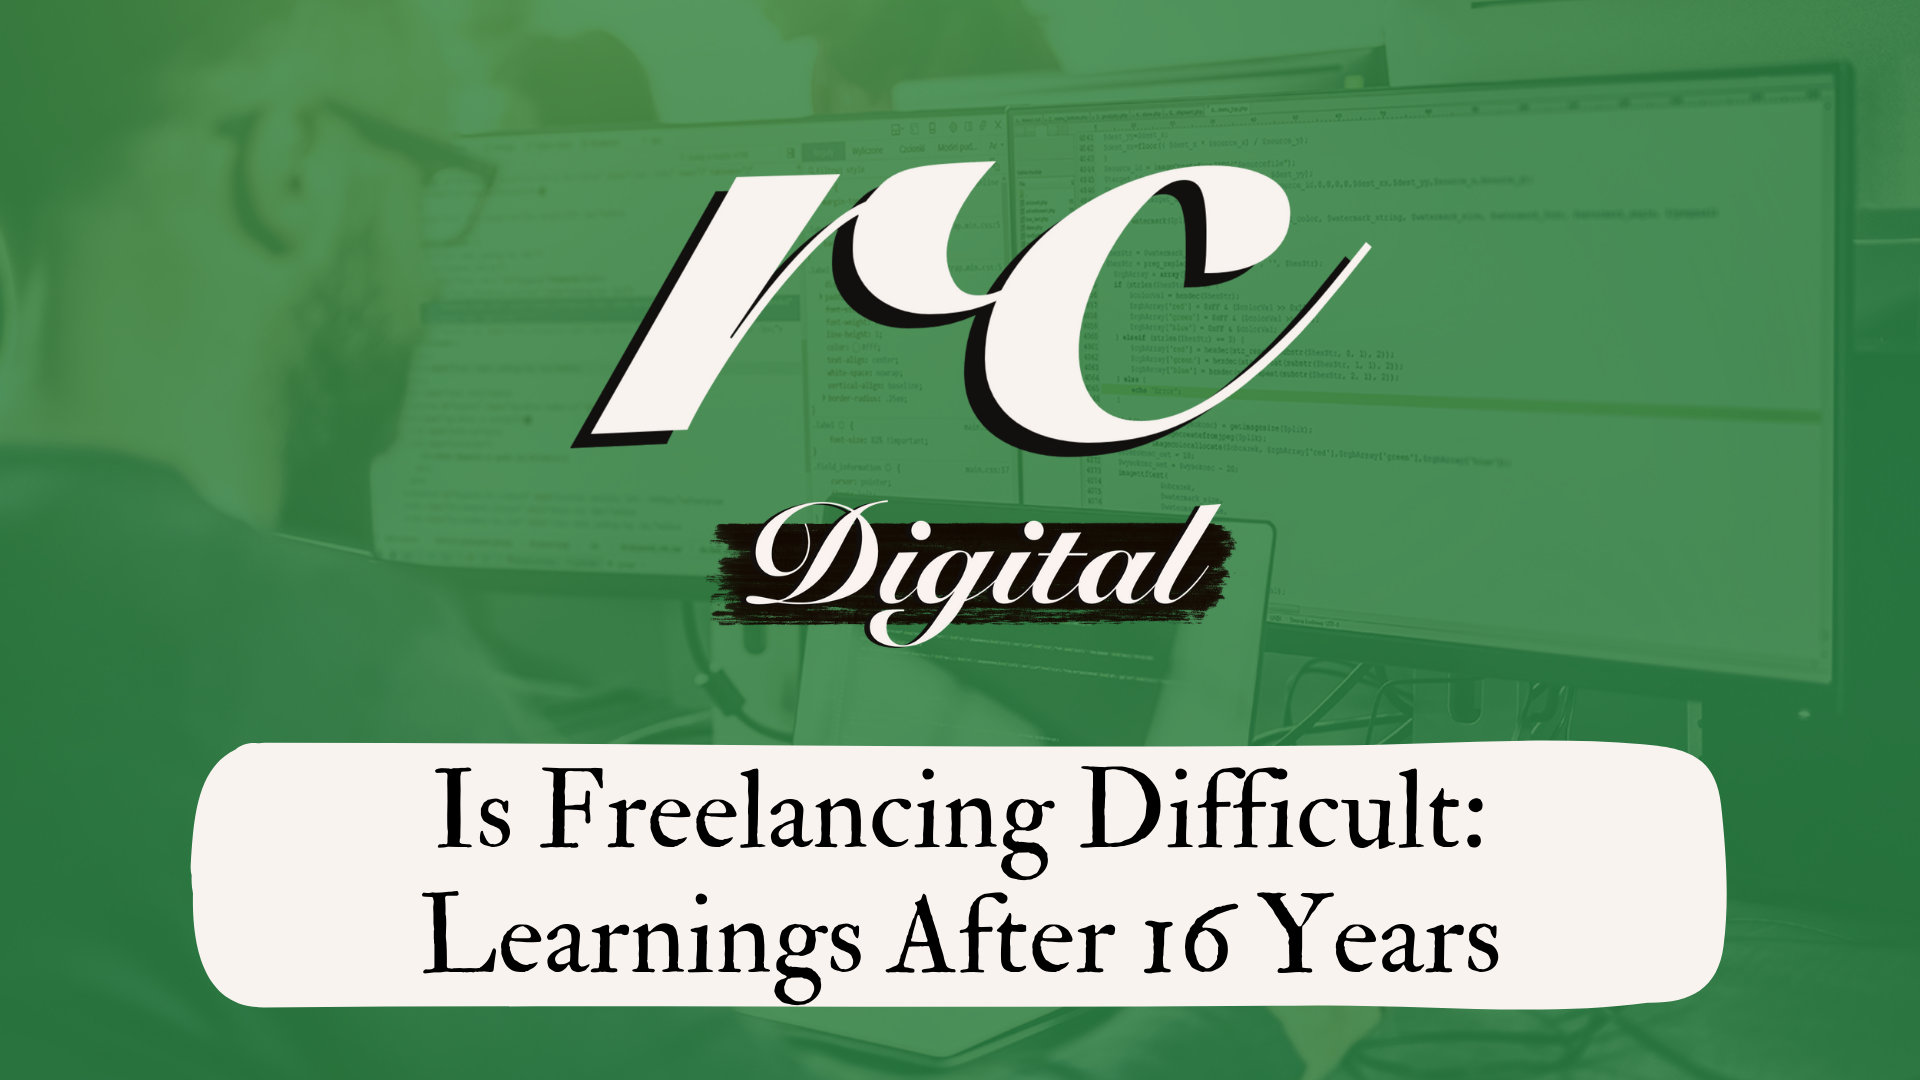 Is Freelancing Difficult: Learnings After 16 Years